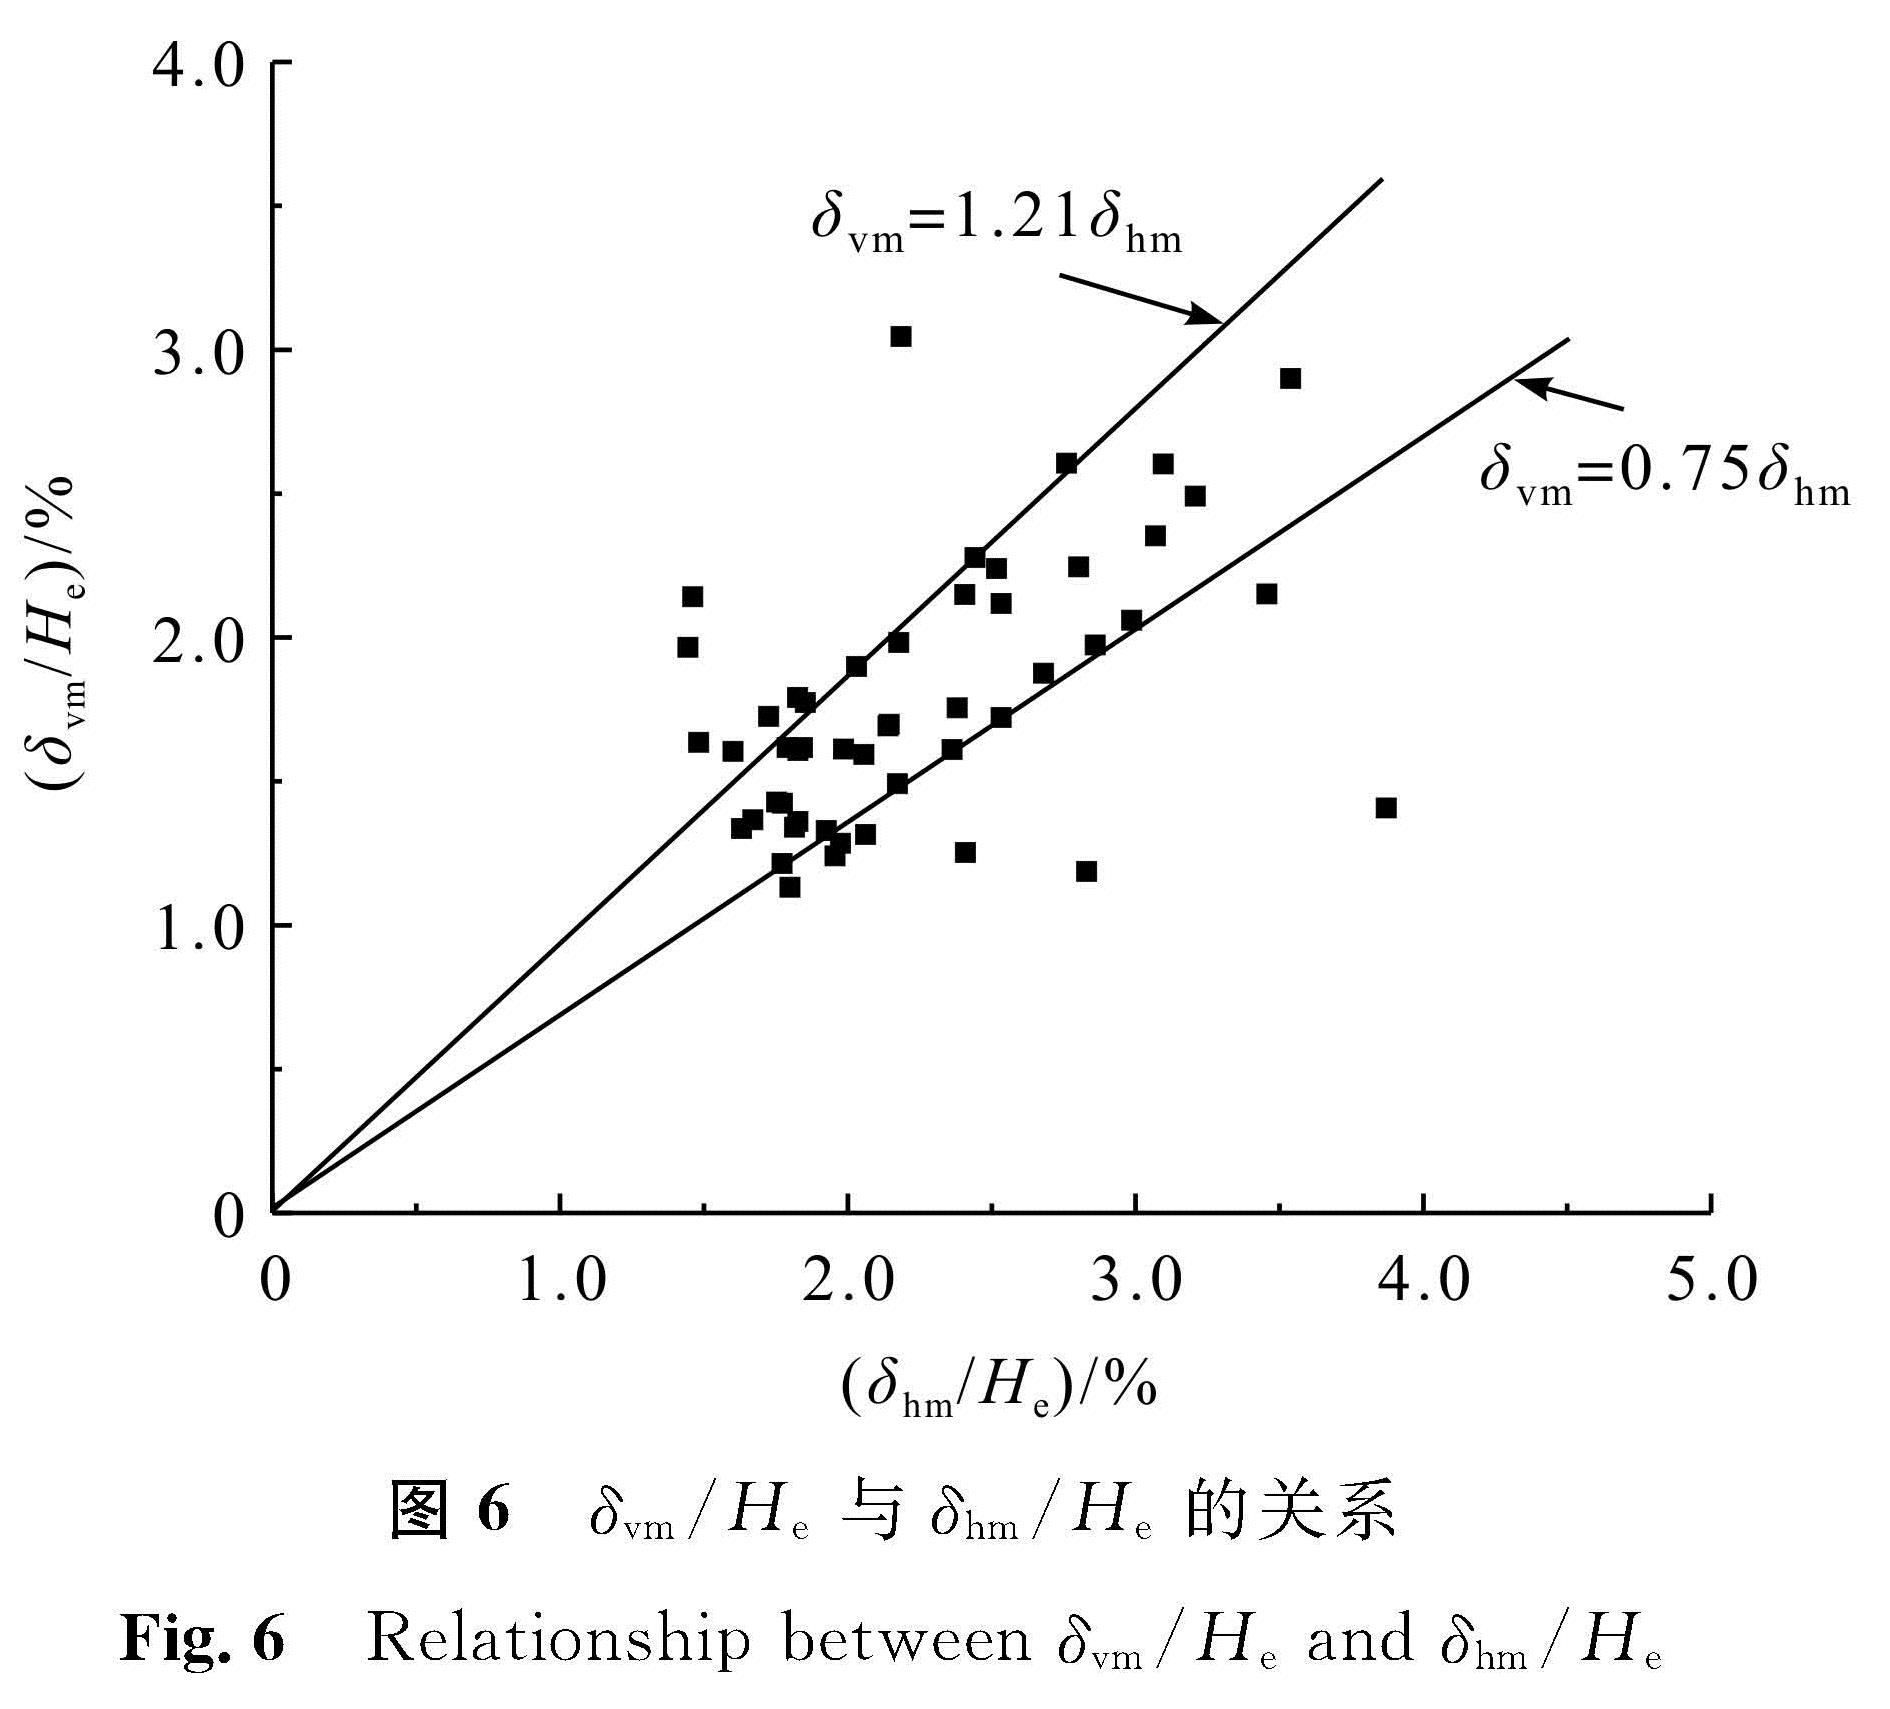 图6 δvm/He与δhm/He的关系<br/>Fig.6 Relationship between δvm/He and δhm/He